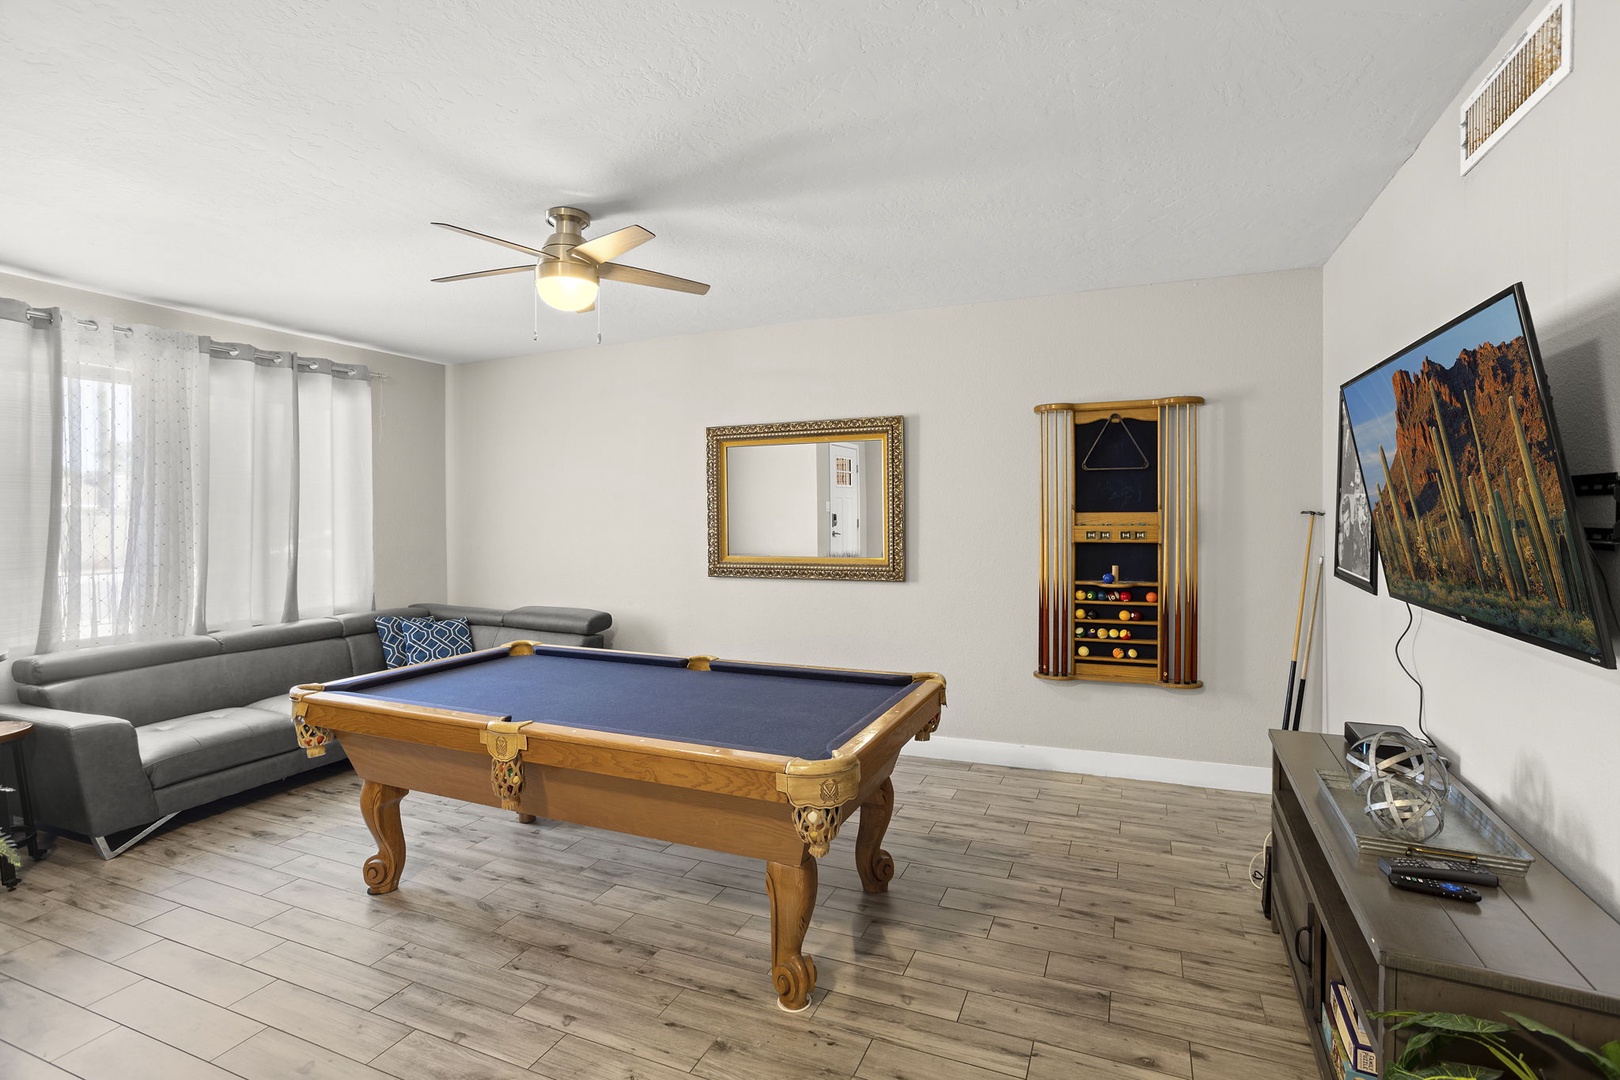 Lounge includes a pool table, flat screen tv, sofa, and high top tables.